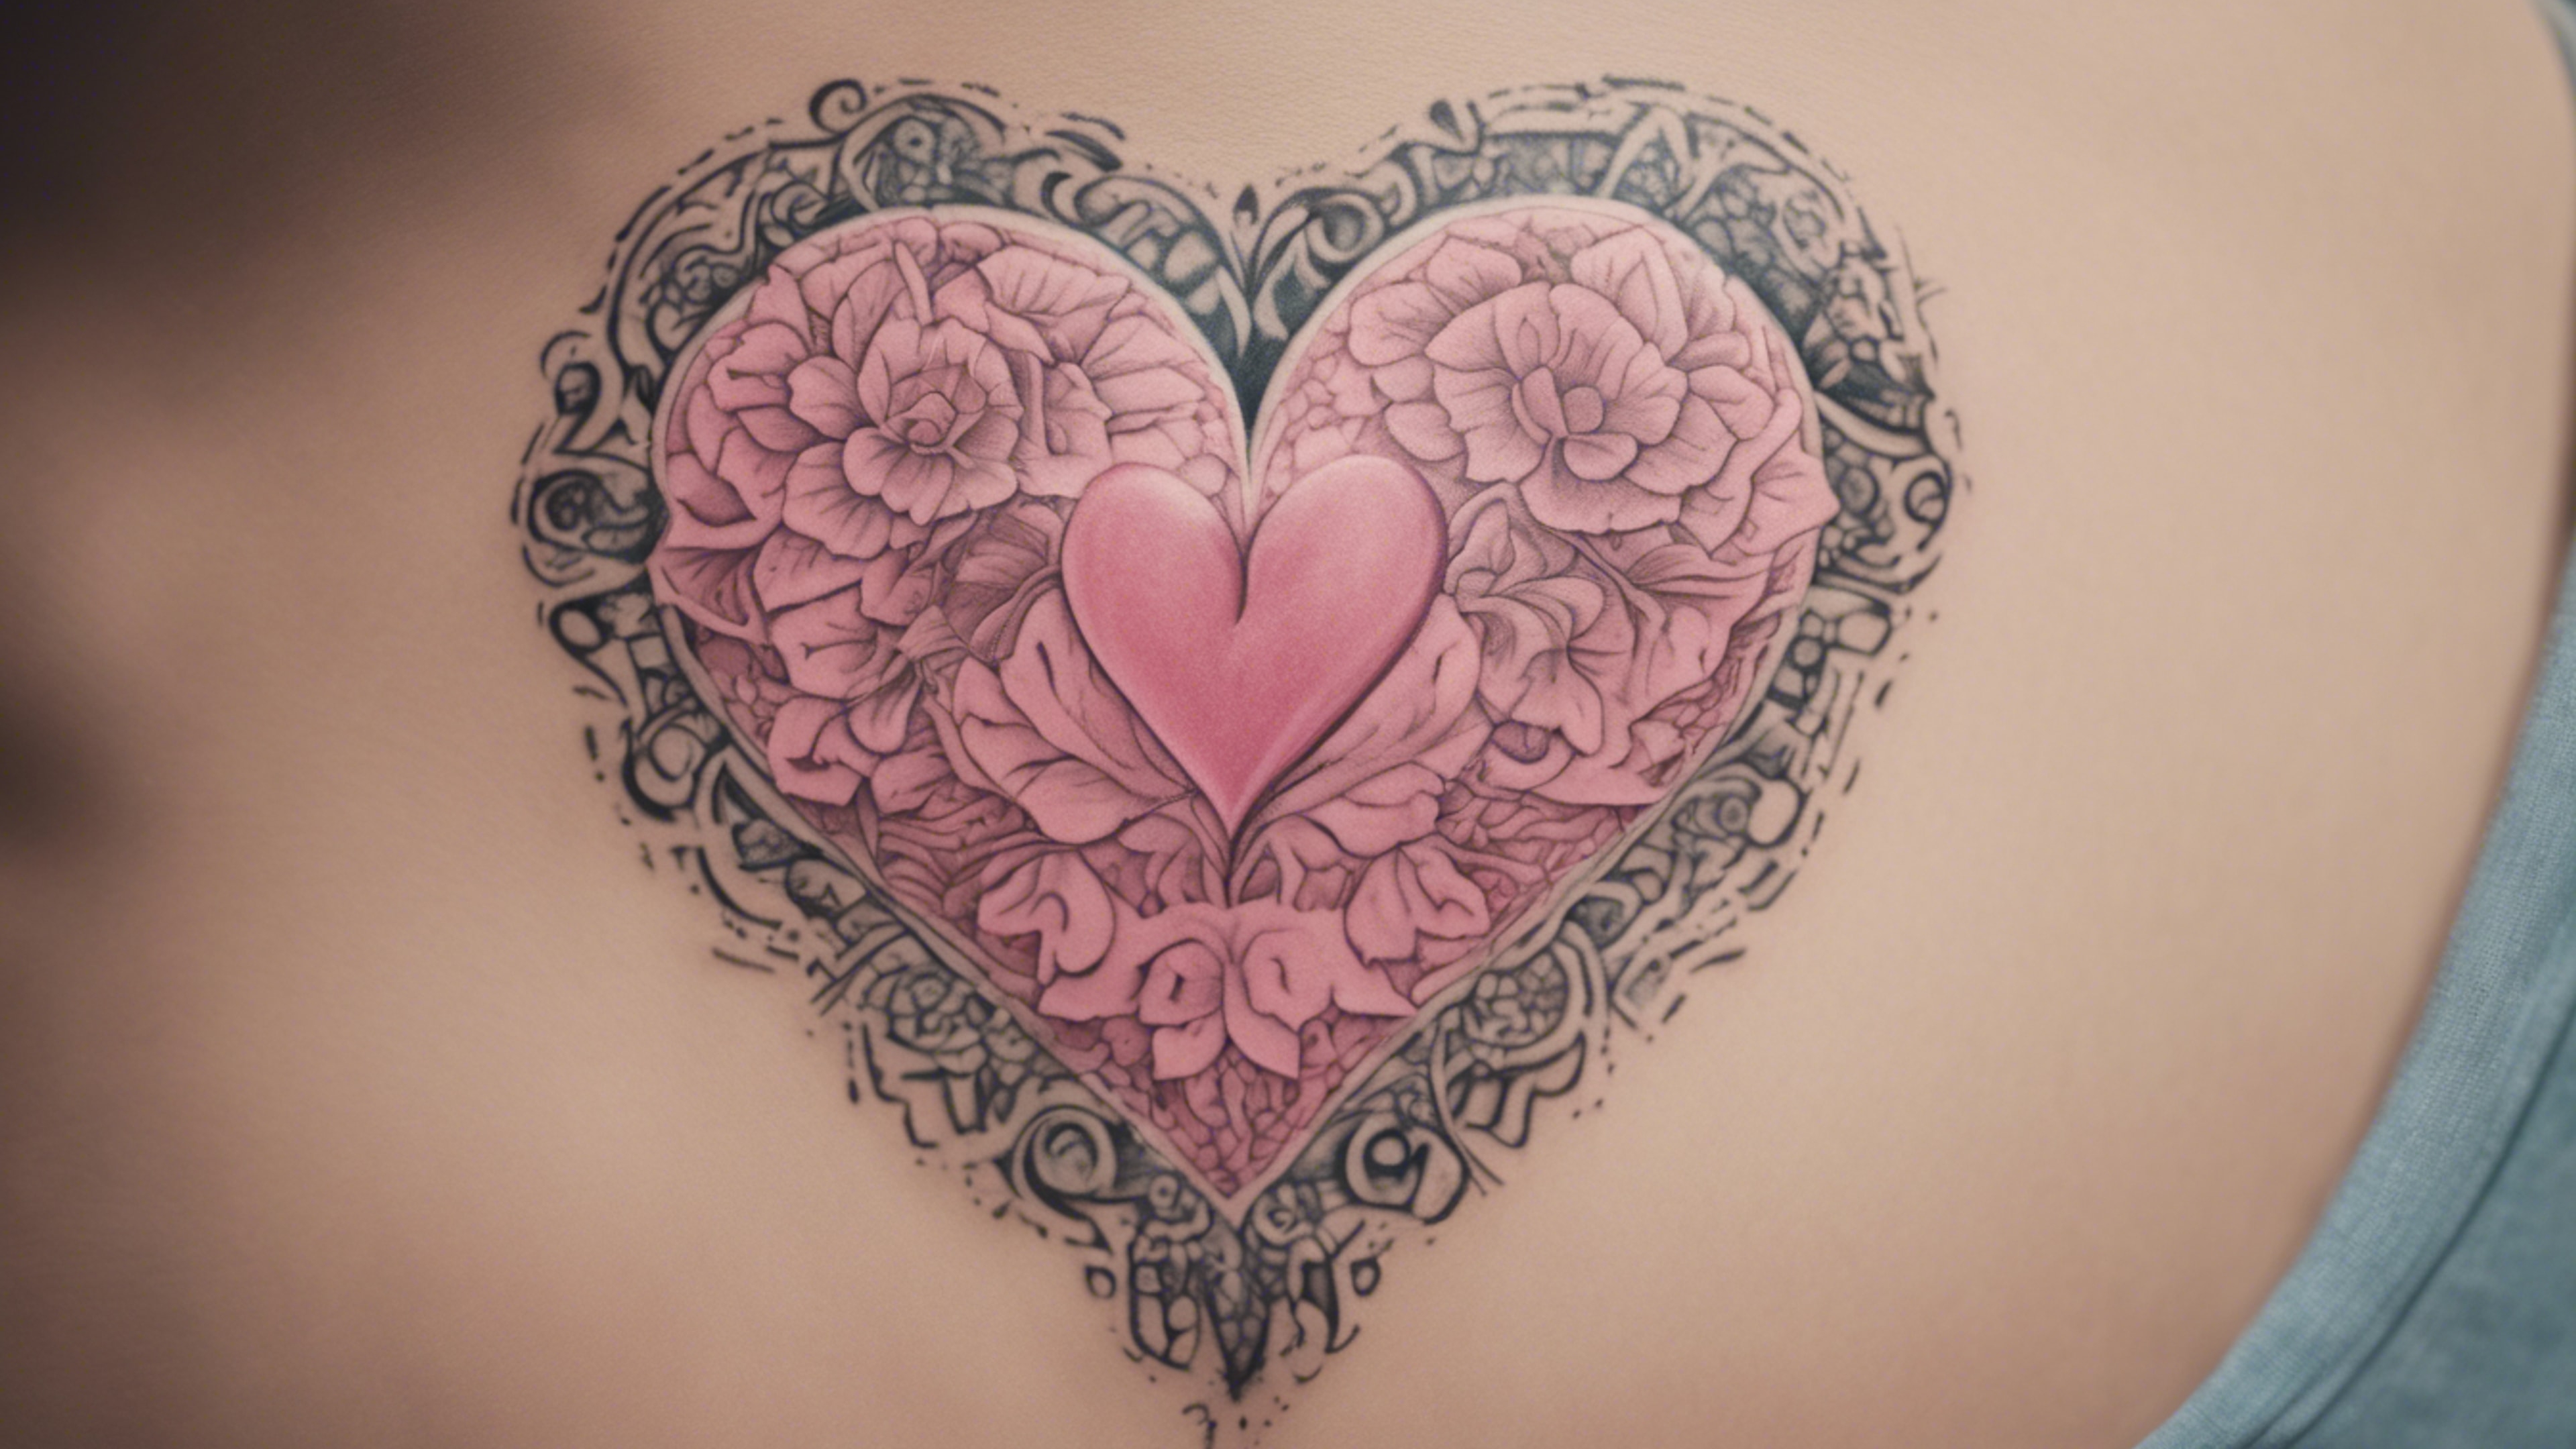 A small pink heart shaped tattoo embellished with intricate floral patterns. Kertas dinding[dd23c5855ab44f40b2fe]